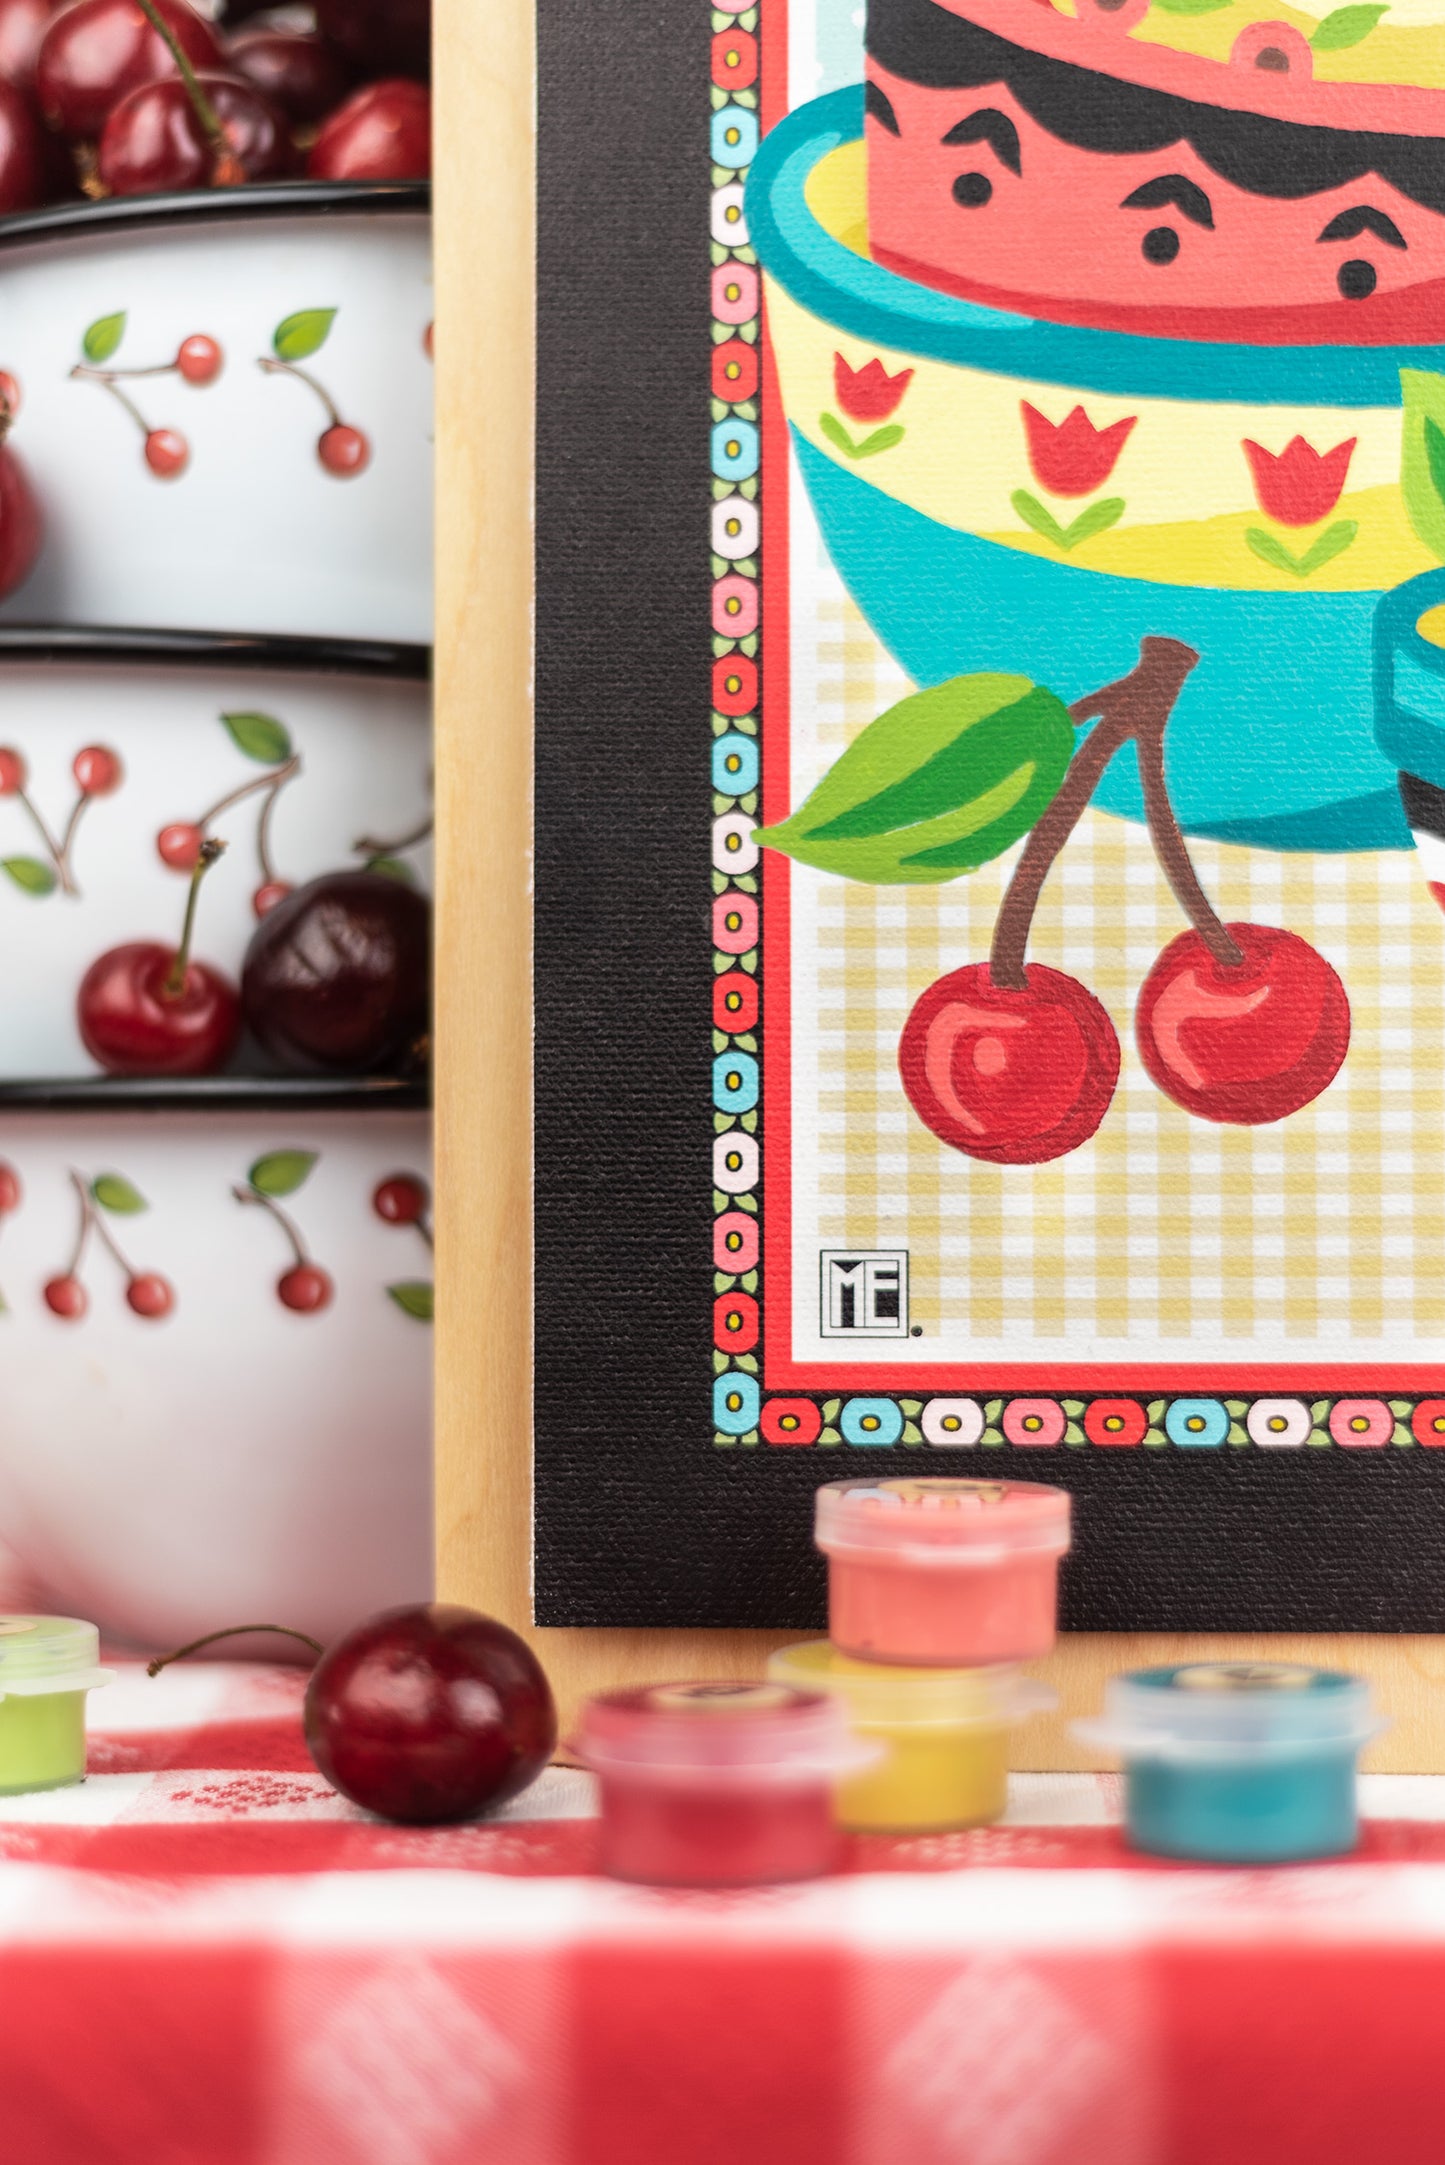 Mary's Cherries | Mary Engelbreit 8x10 paint-by-number kit - Elle Crée